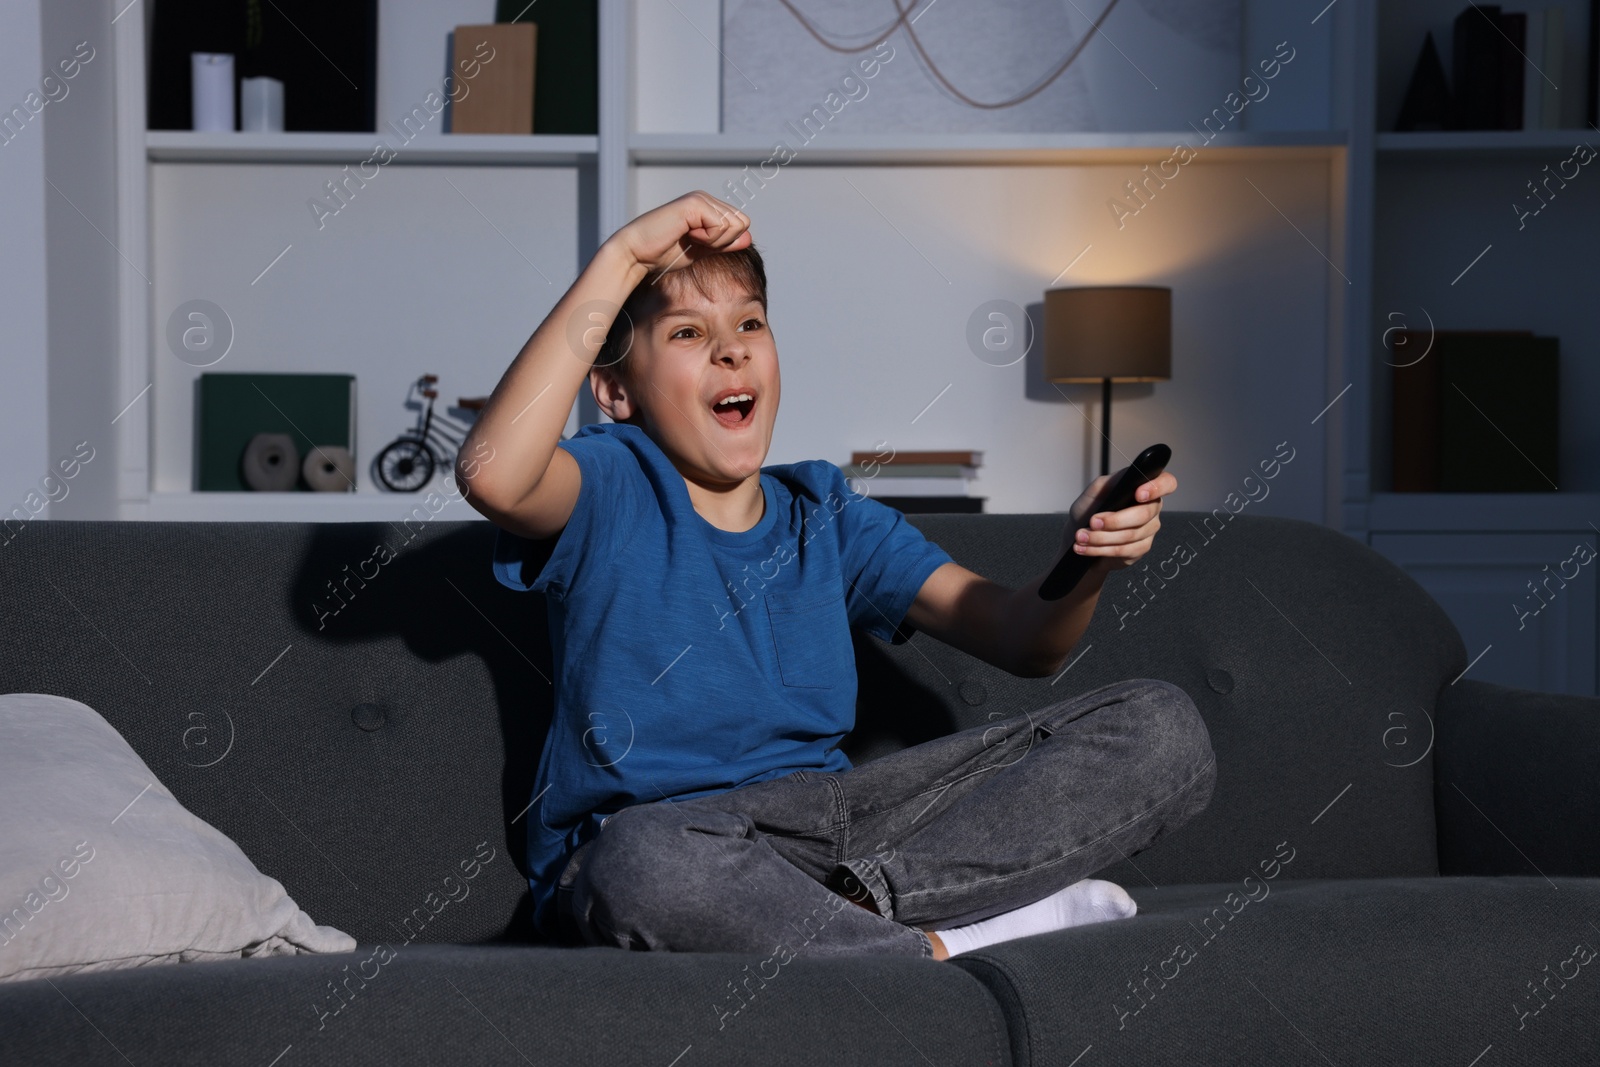 Photo of Emotional boy watching TV and holding remote control on sofa at home